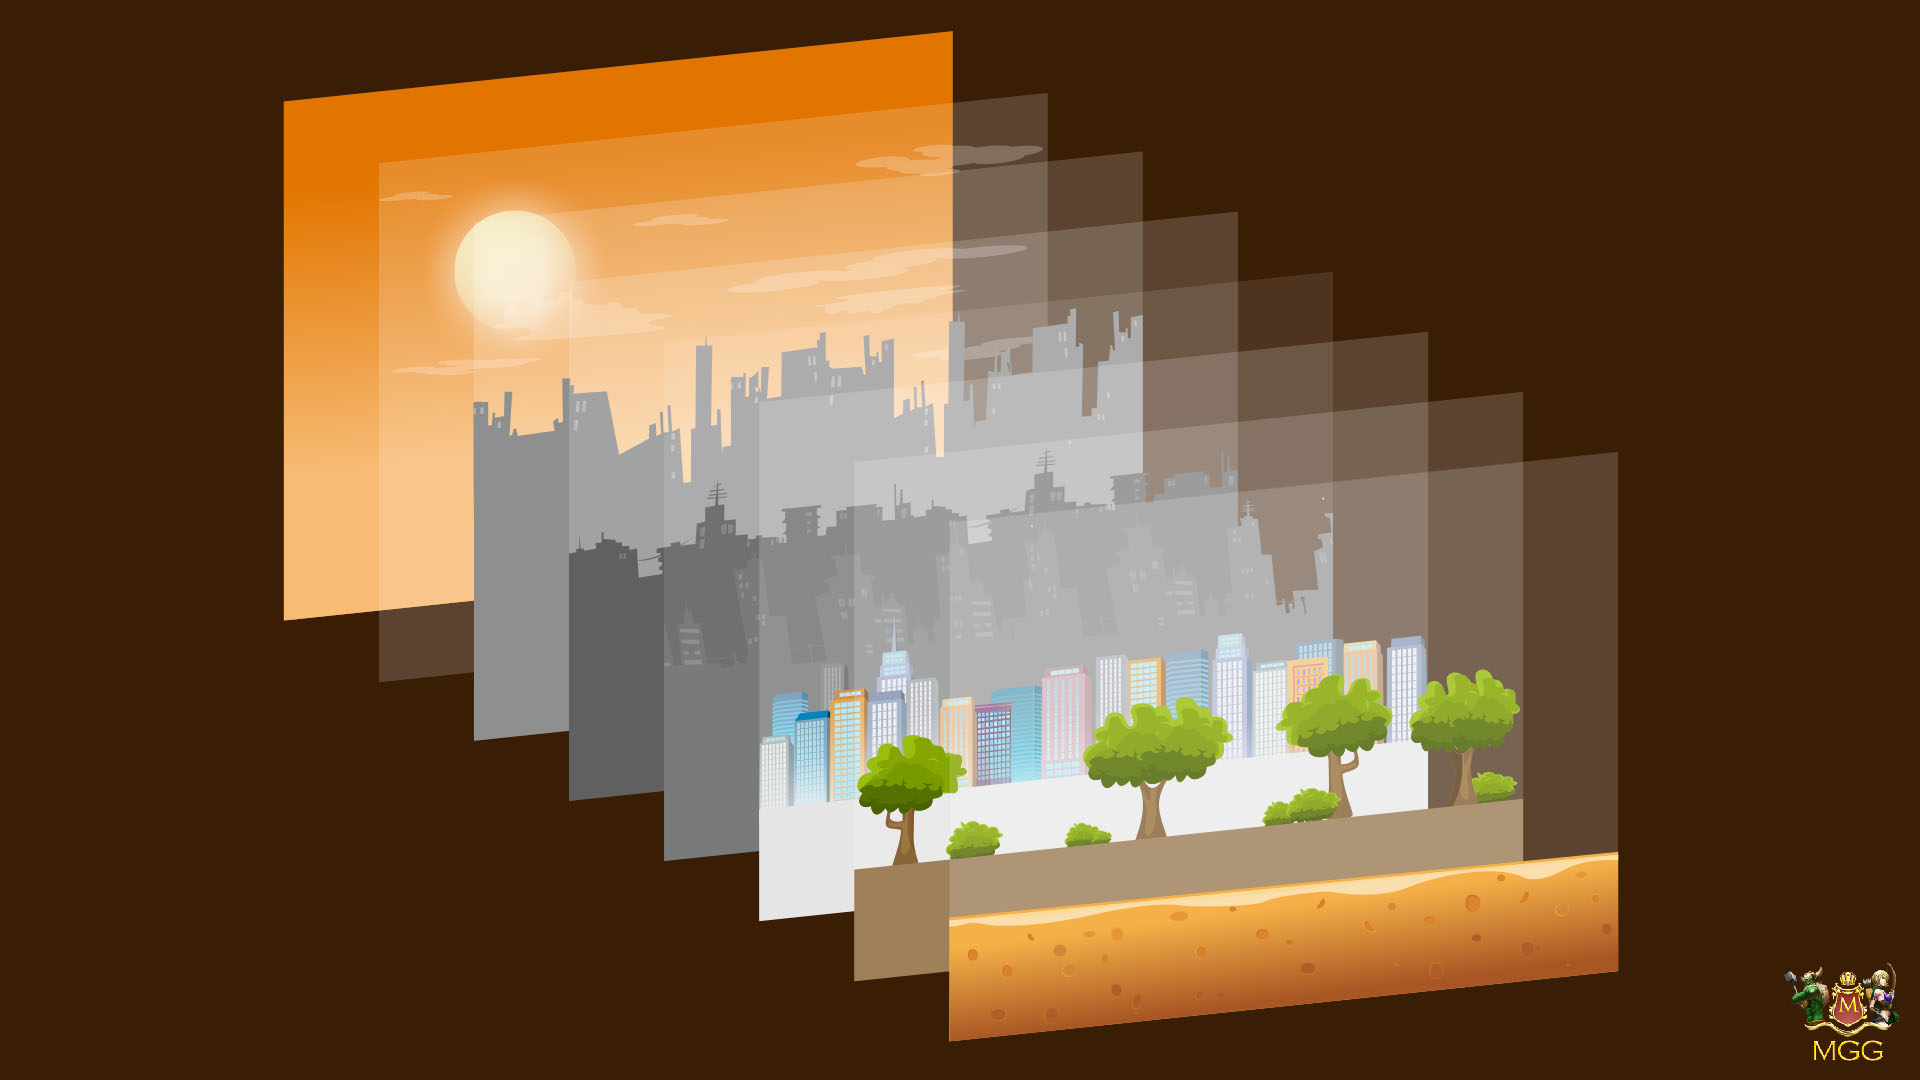 Get the perfect Parallax background game 2d for your game